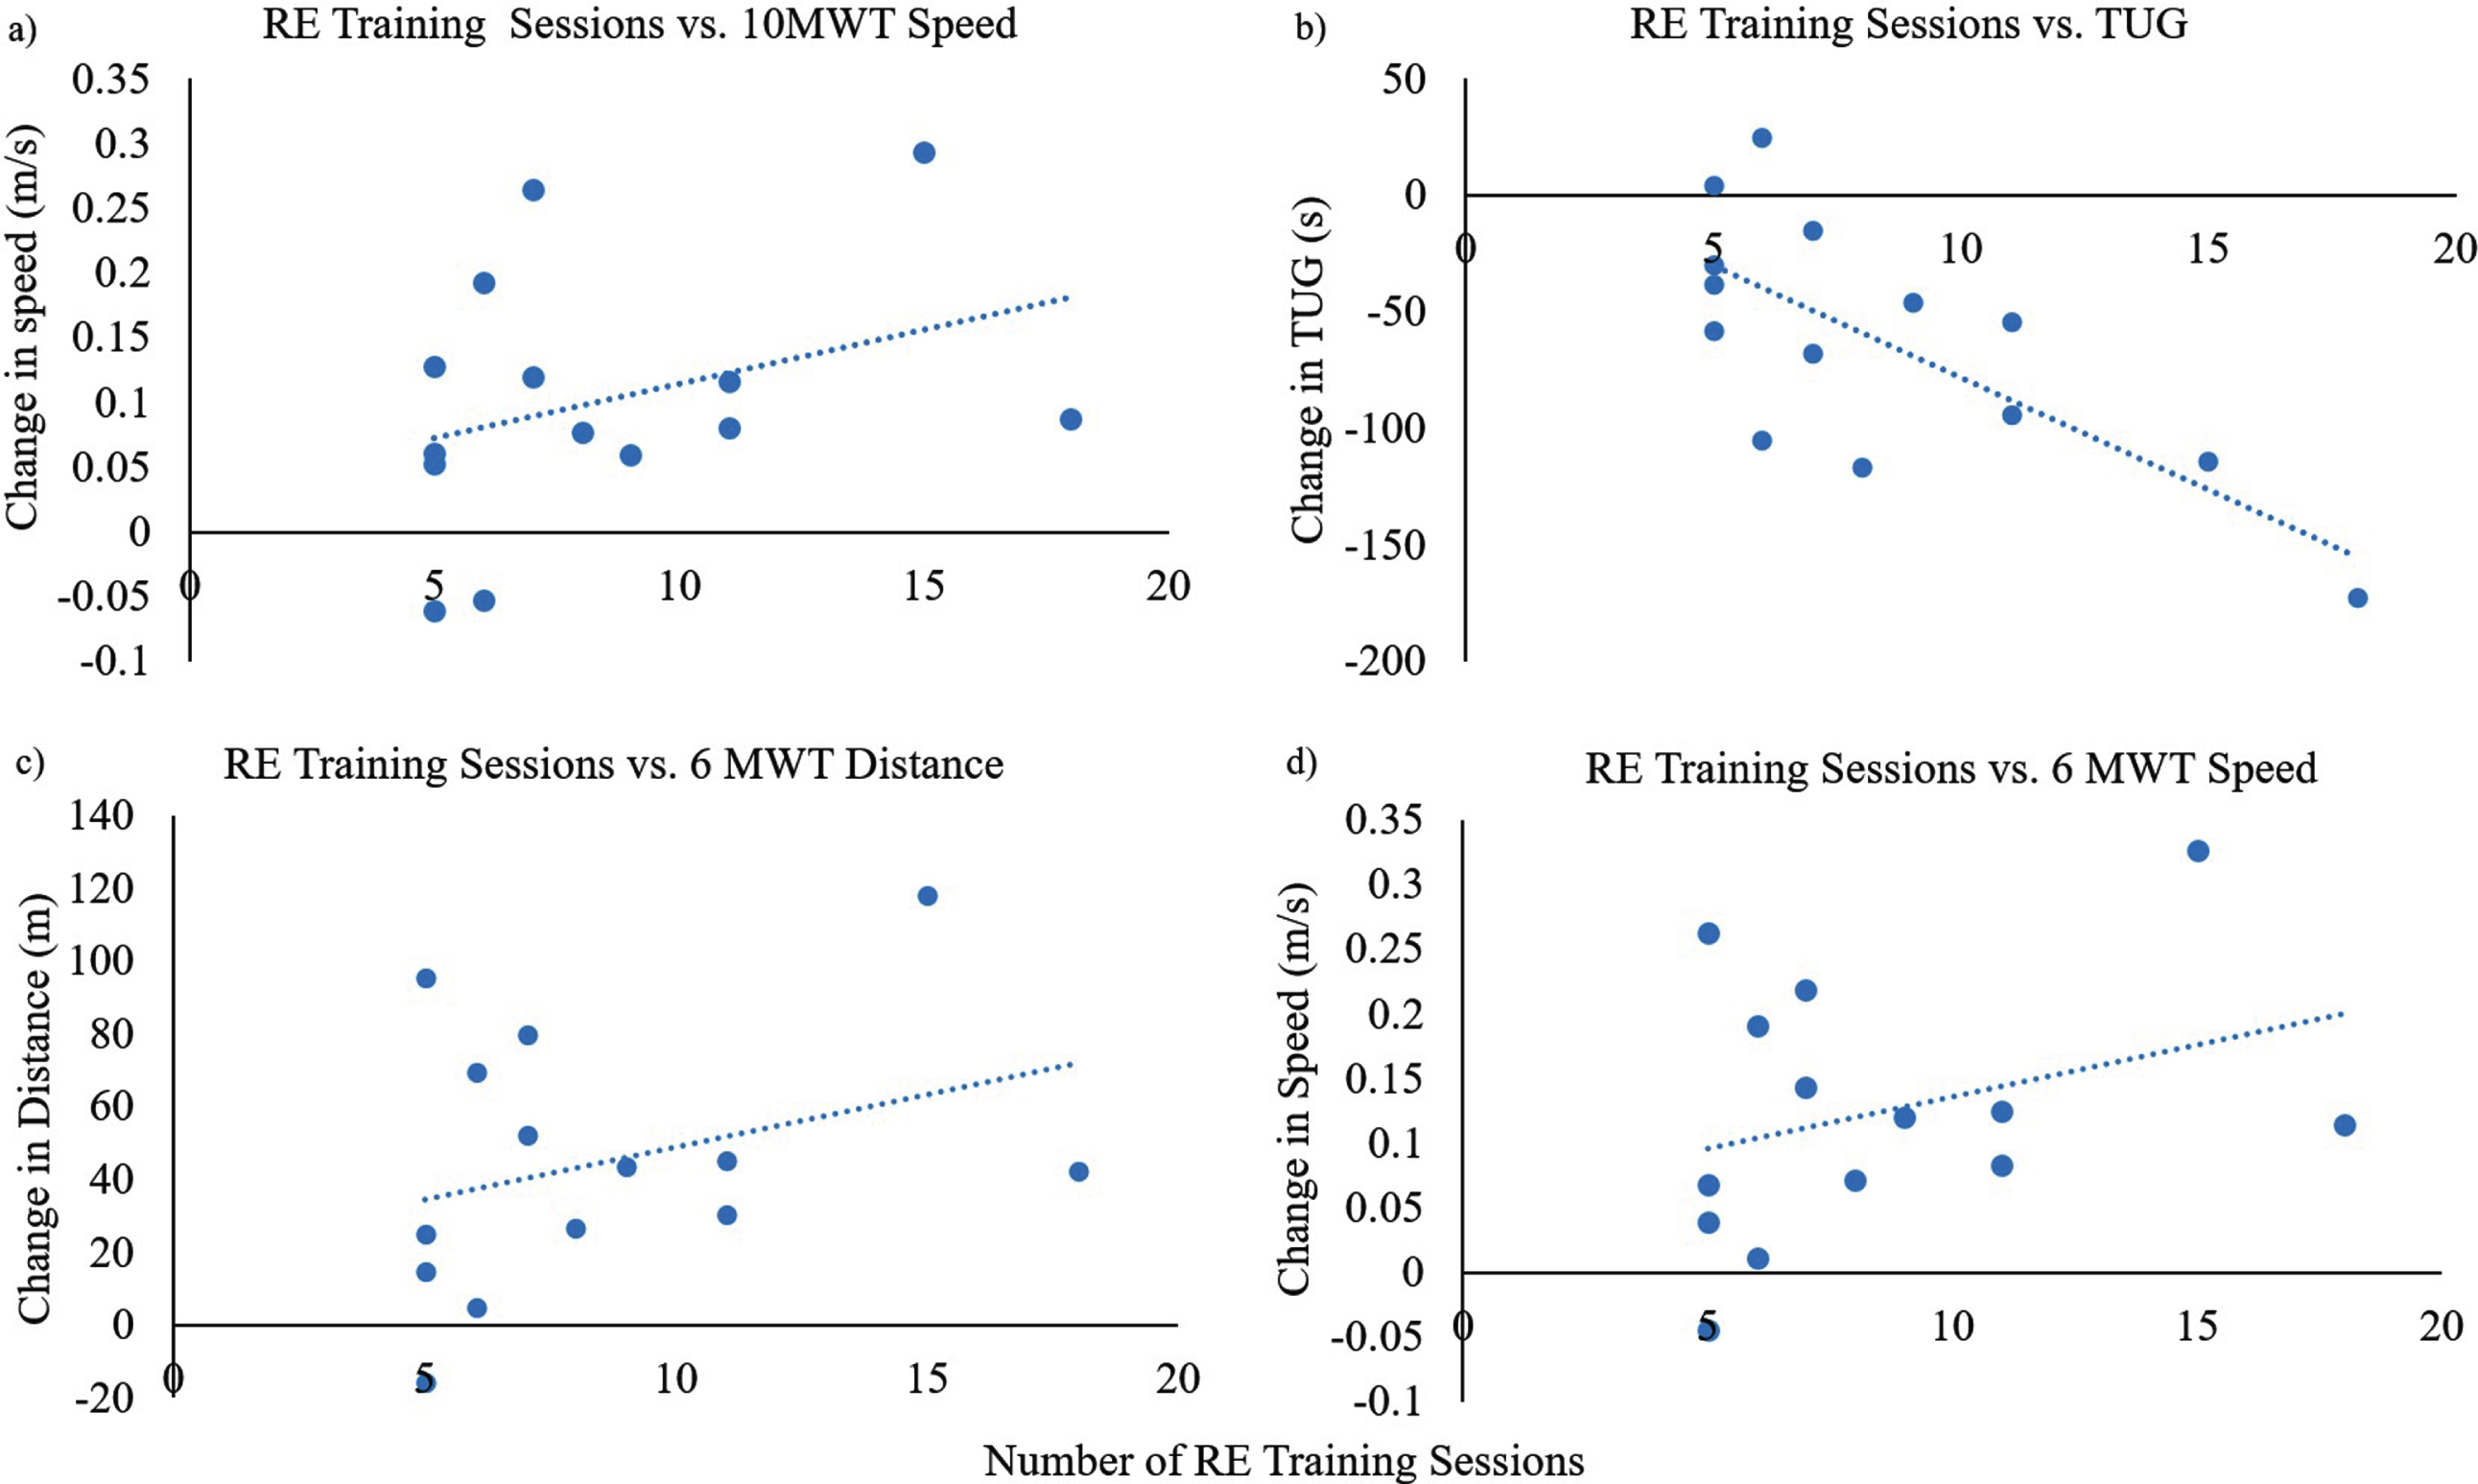 a) Number of RE training sessions vs. change in 10MWT speed, b) Number of RE training sessions vs. change in time to complete the TUG (seconds); c) Number of RE training sessions vs. change in 6MWT distance, d) Number of RE training sessions vs. change in 6MWT speed.